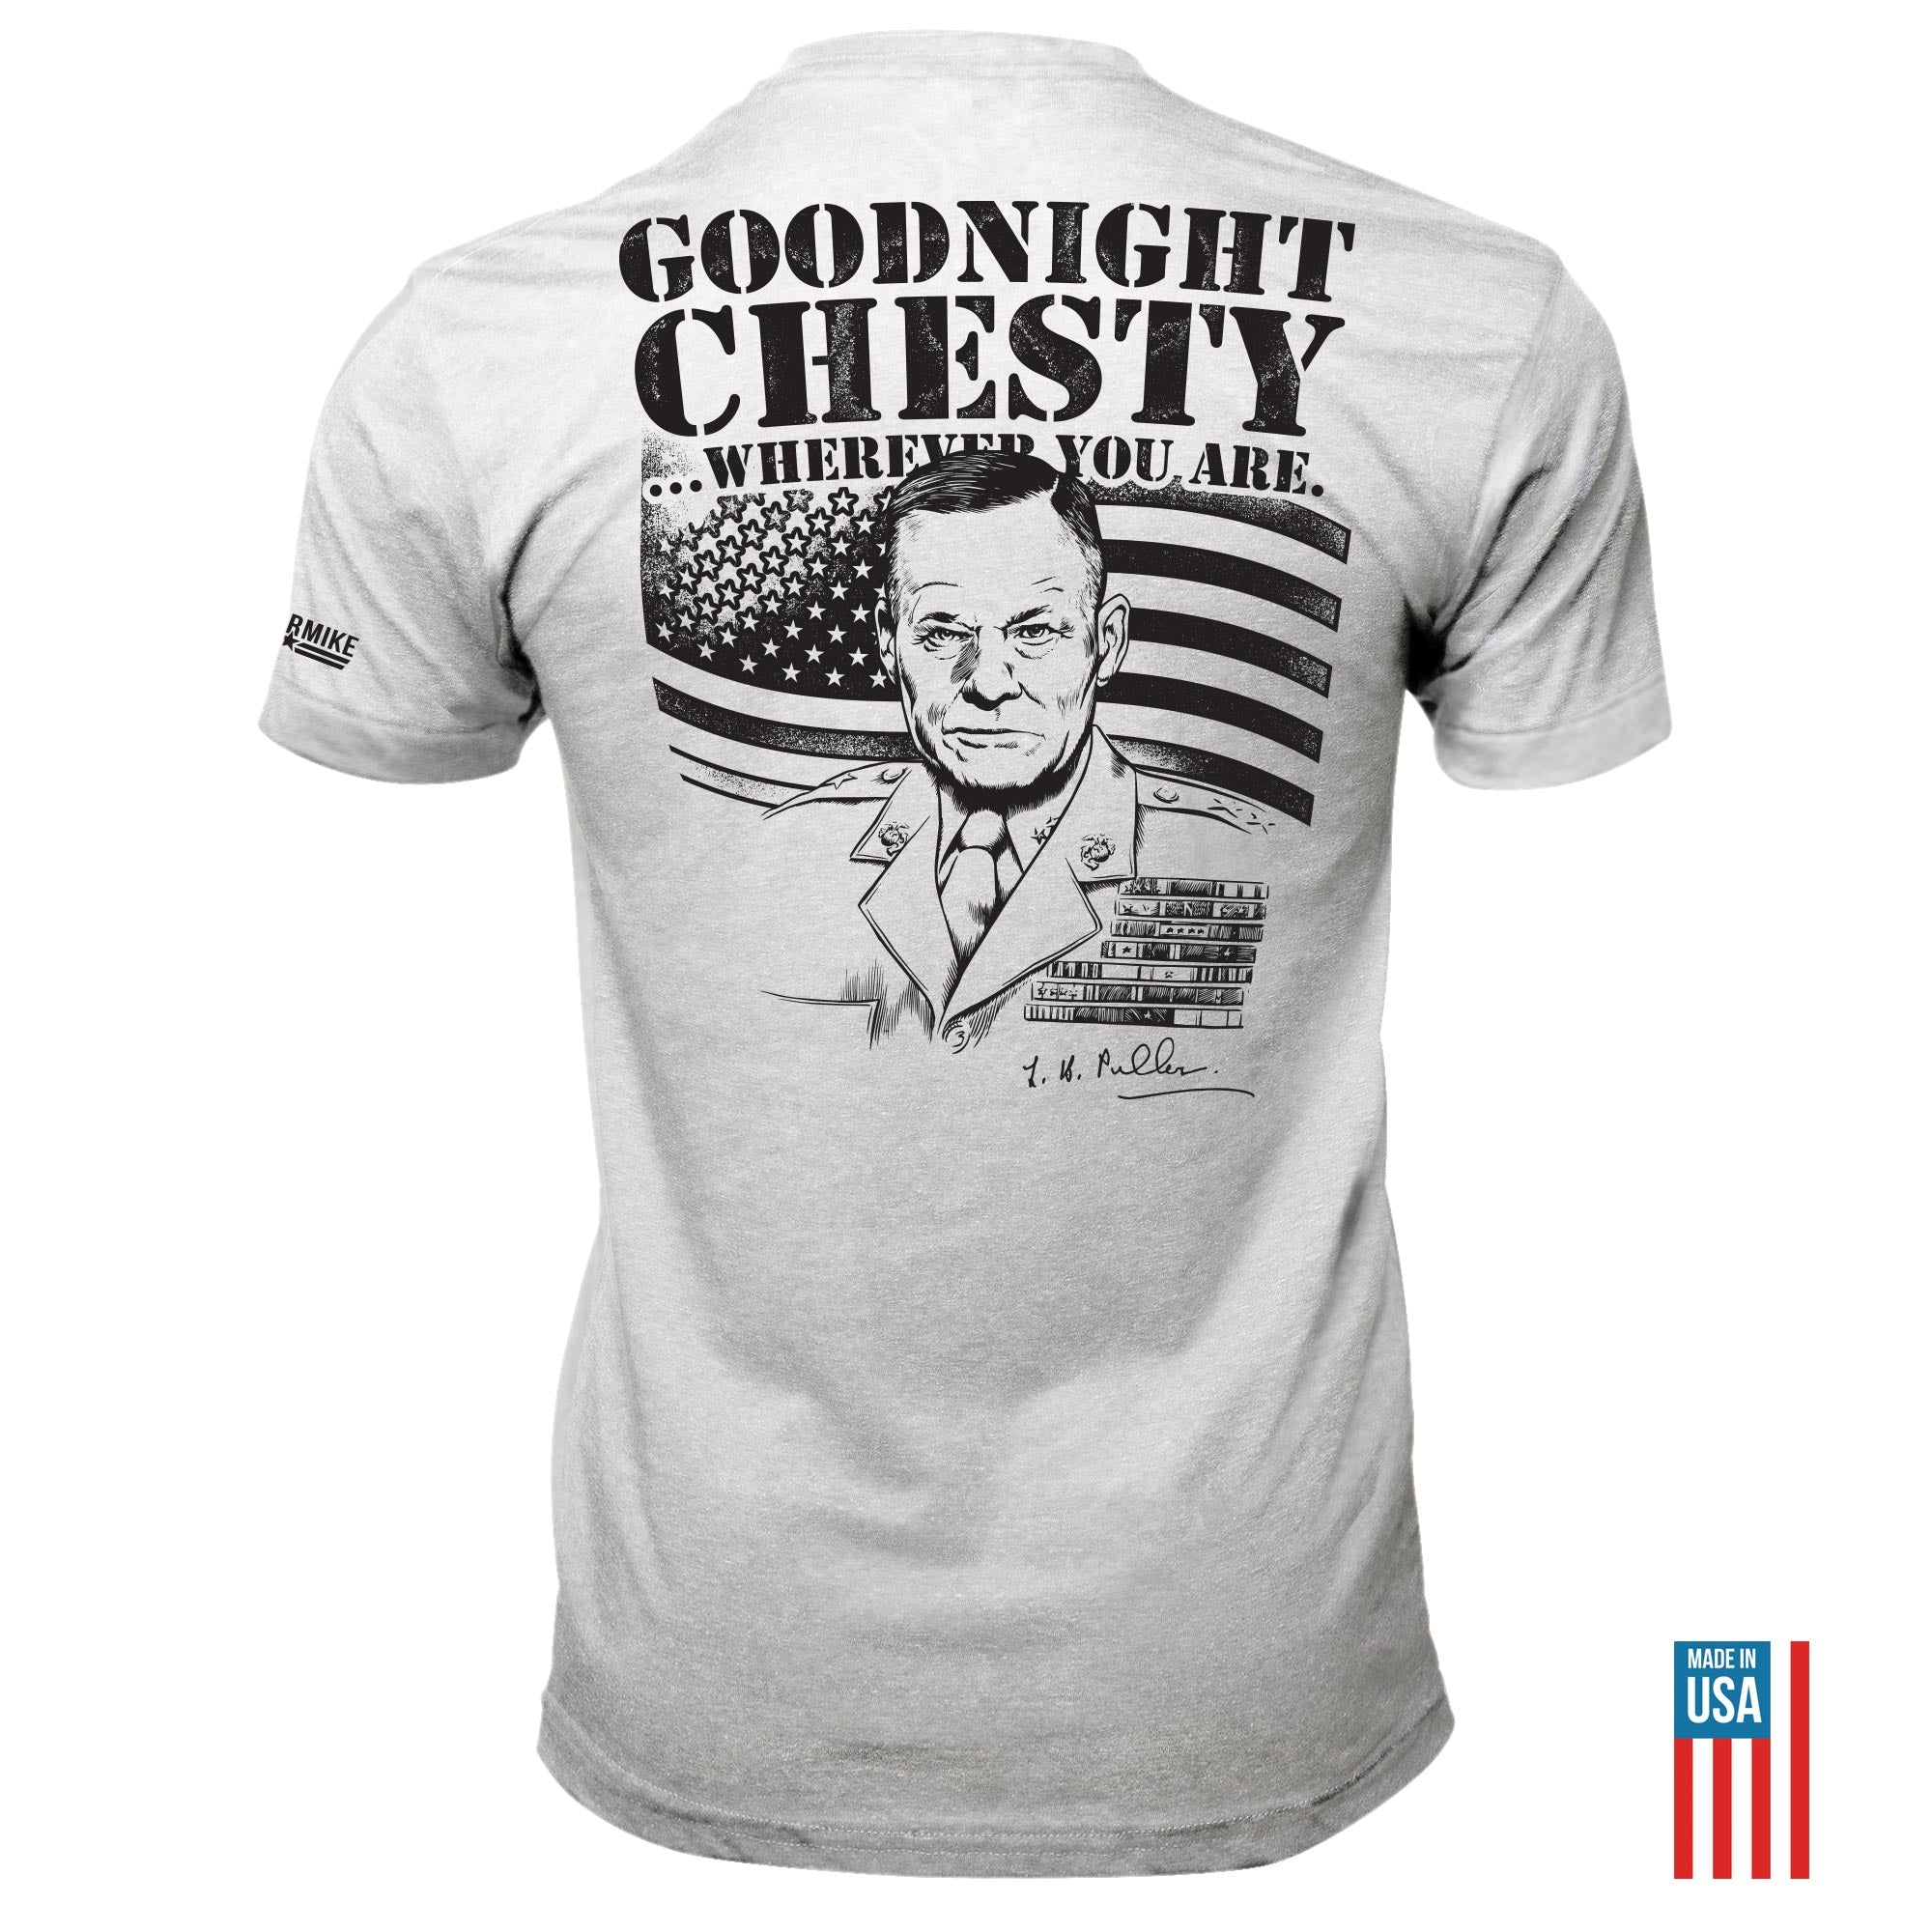 Goodnight Chesty Tee T-Shirt from Oscar Mike Apparel